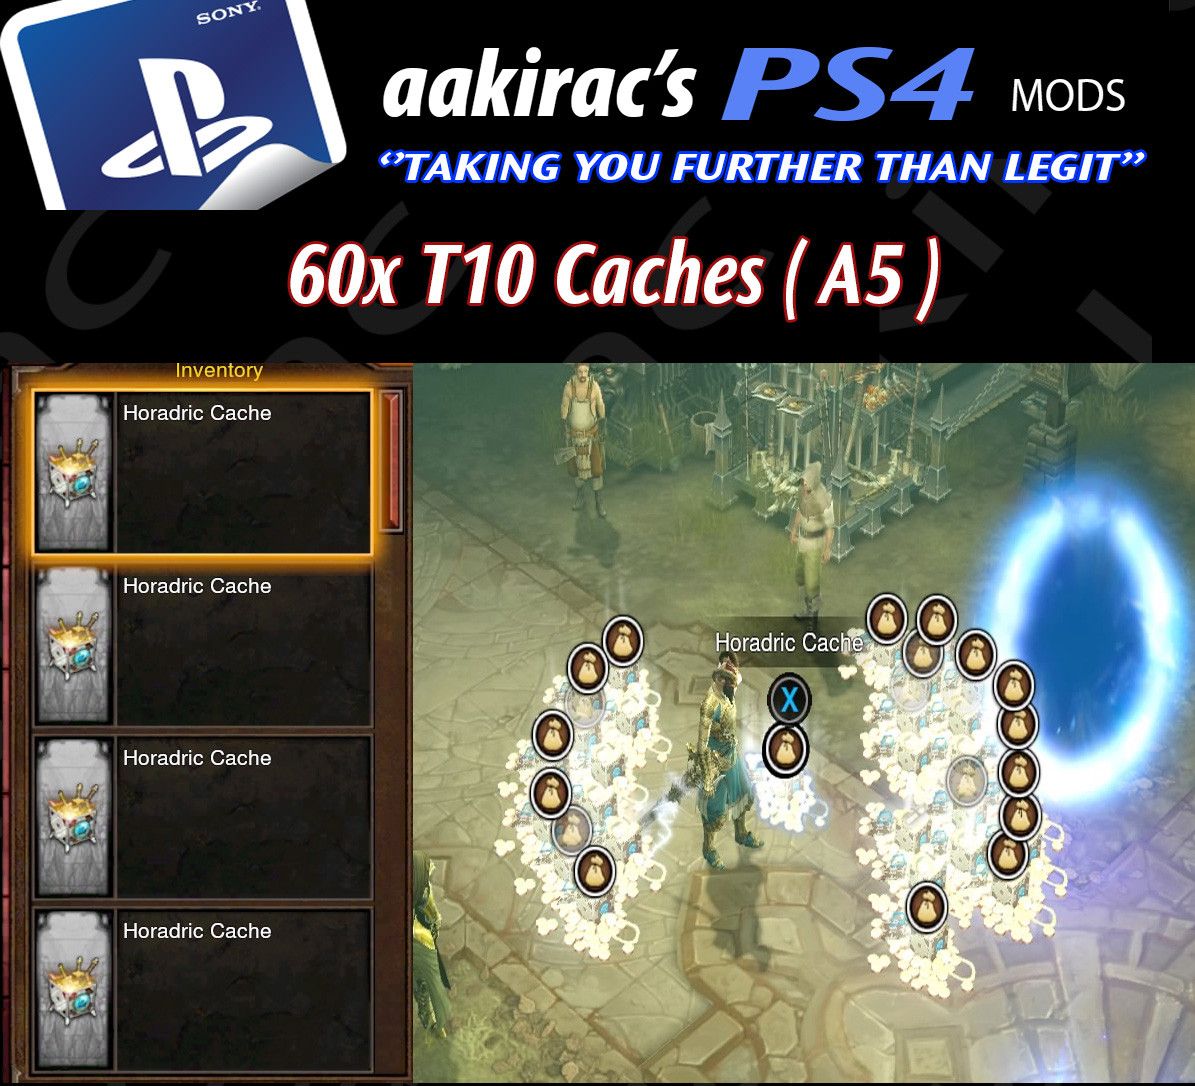 T10 Cache's for Diablo 3 Diablo 3 Mods ROS Seasonal and Non Seasonal Save Mod - Modded Items and Gear - Hacks - Cheats - Trainers for Playstation 4 - Playstation 5 - Nintendo Switch - Xbox One